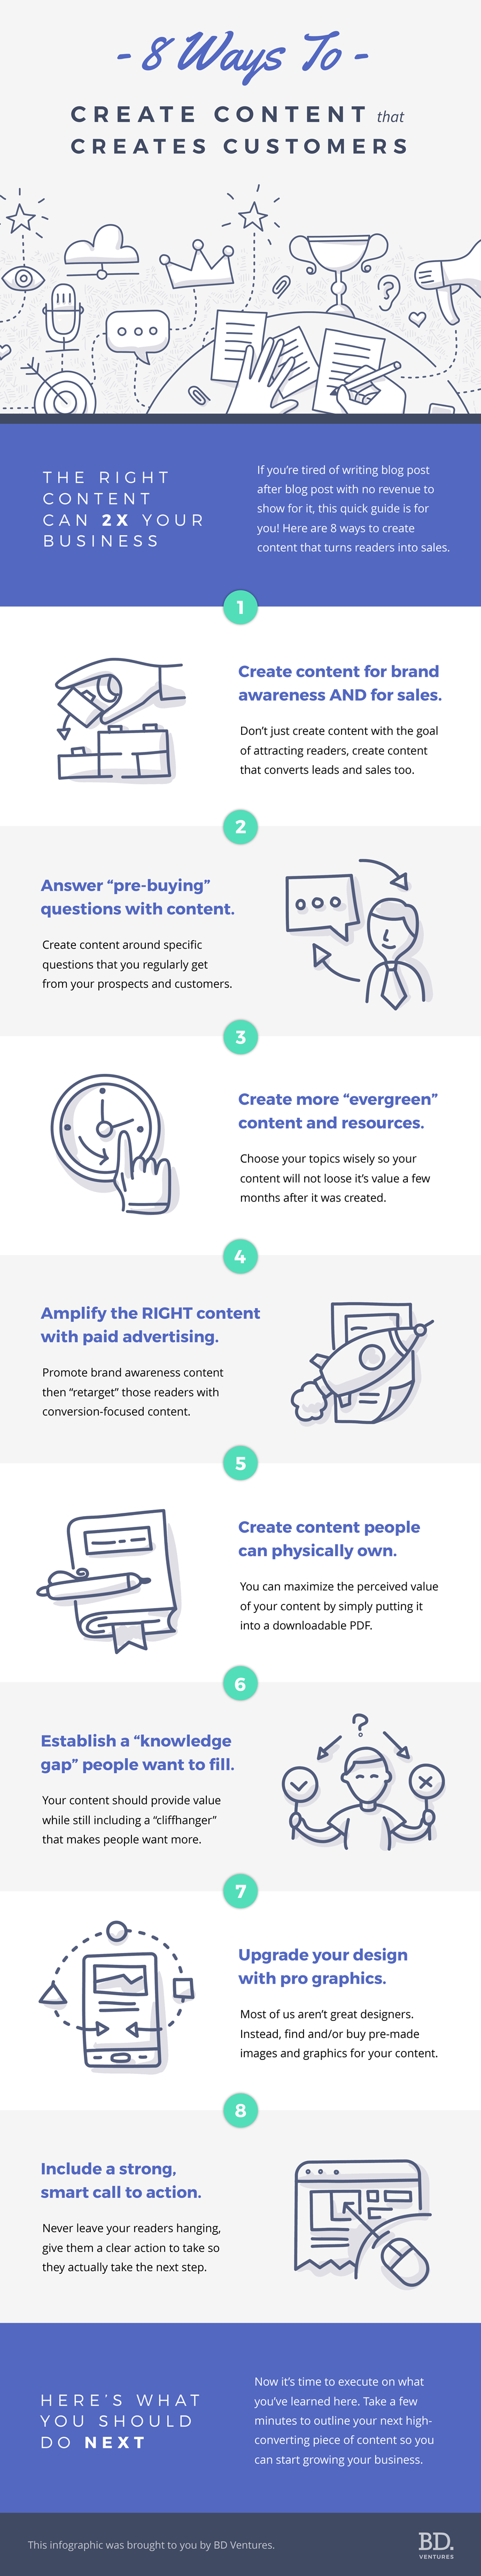 8 Ways To Create Content That Creates Customers (Infographic)